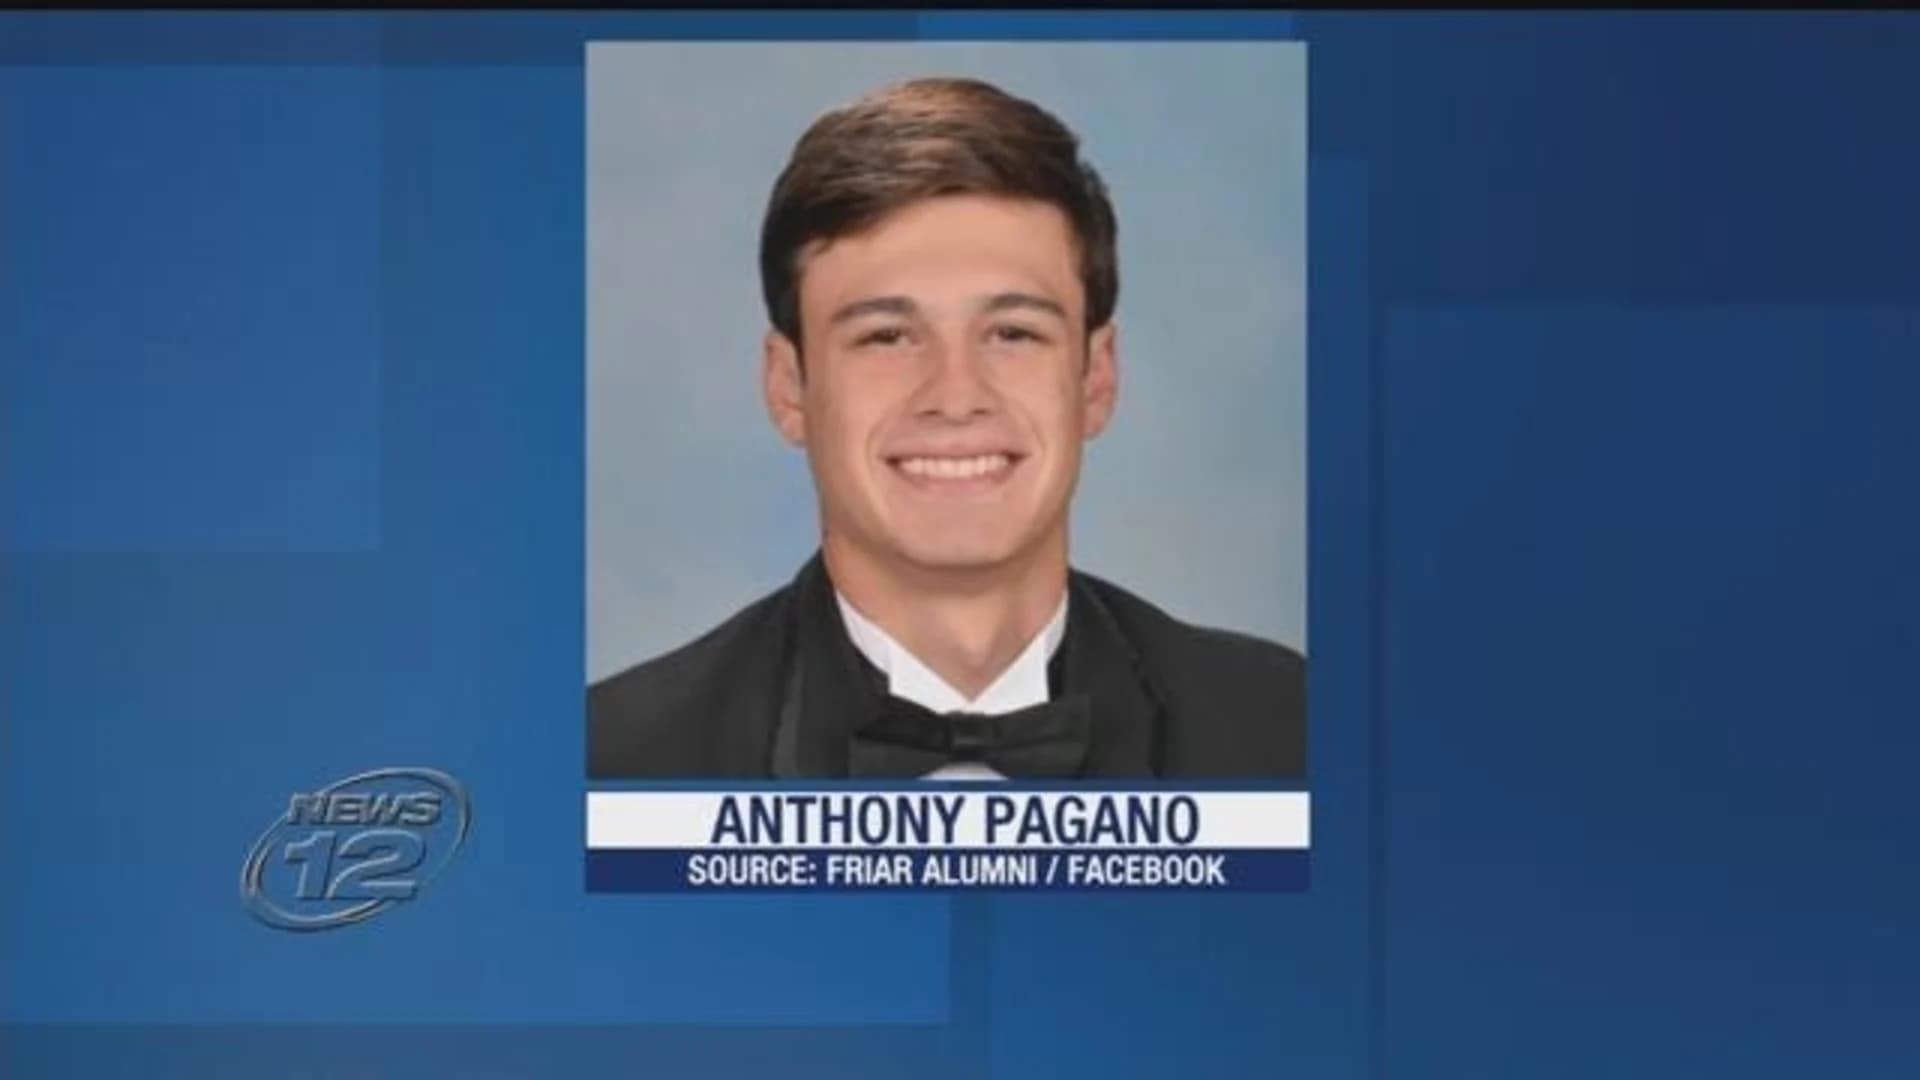 Funeral Mass held for Melville teen killed in upstate crash